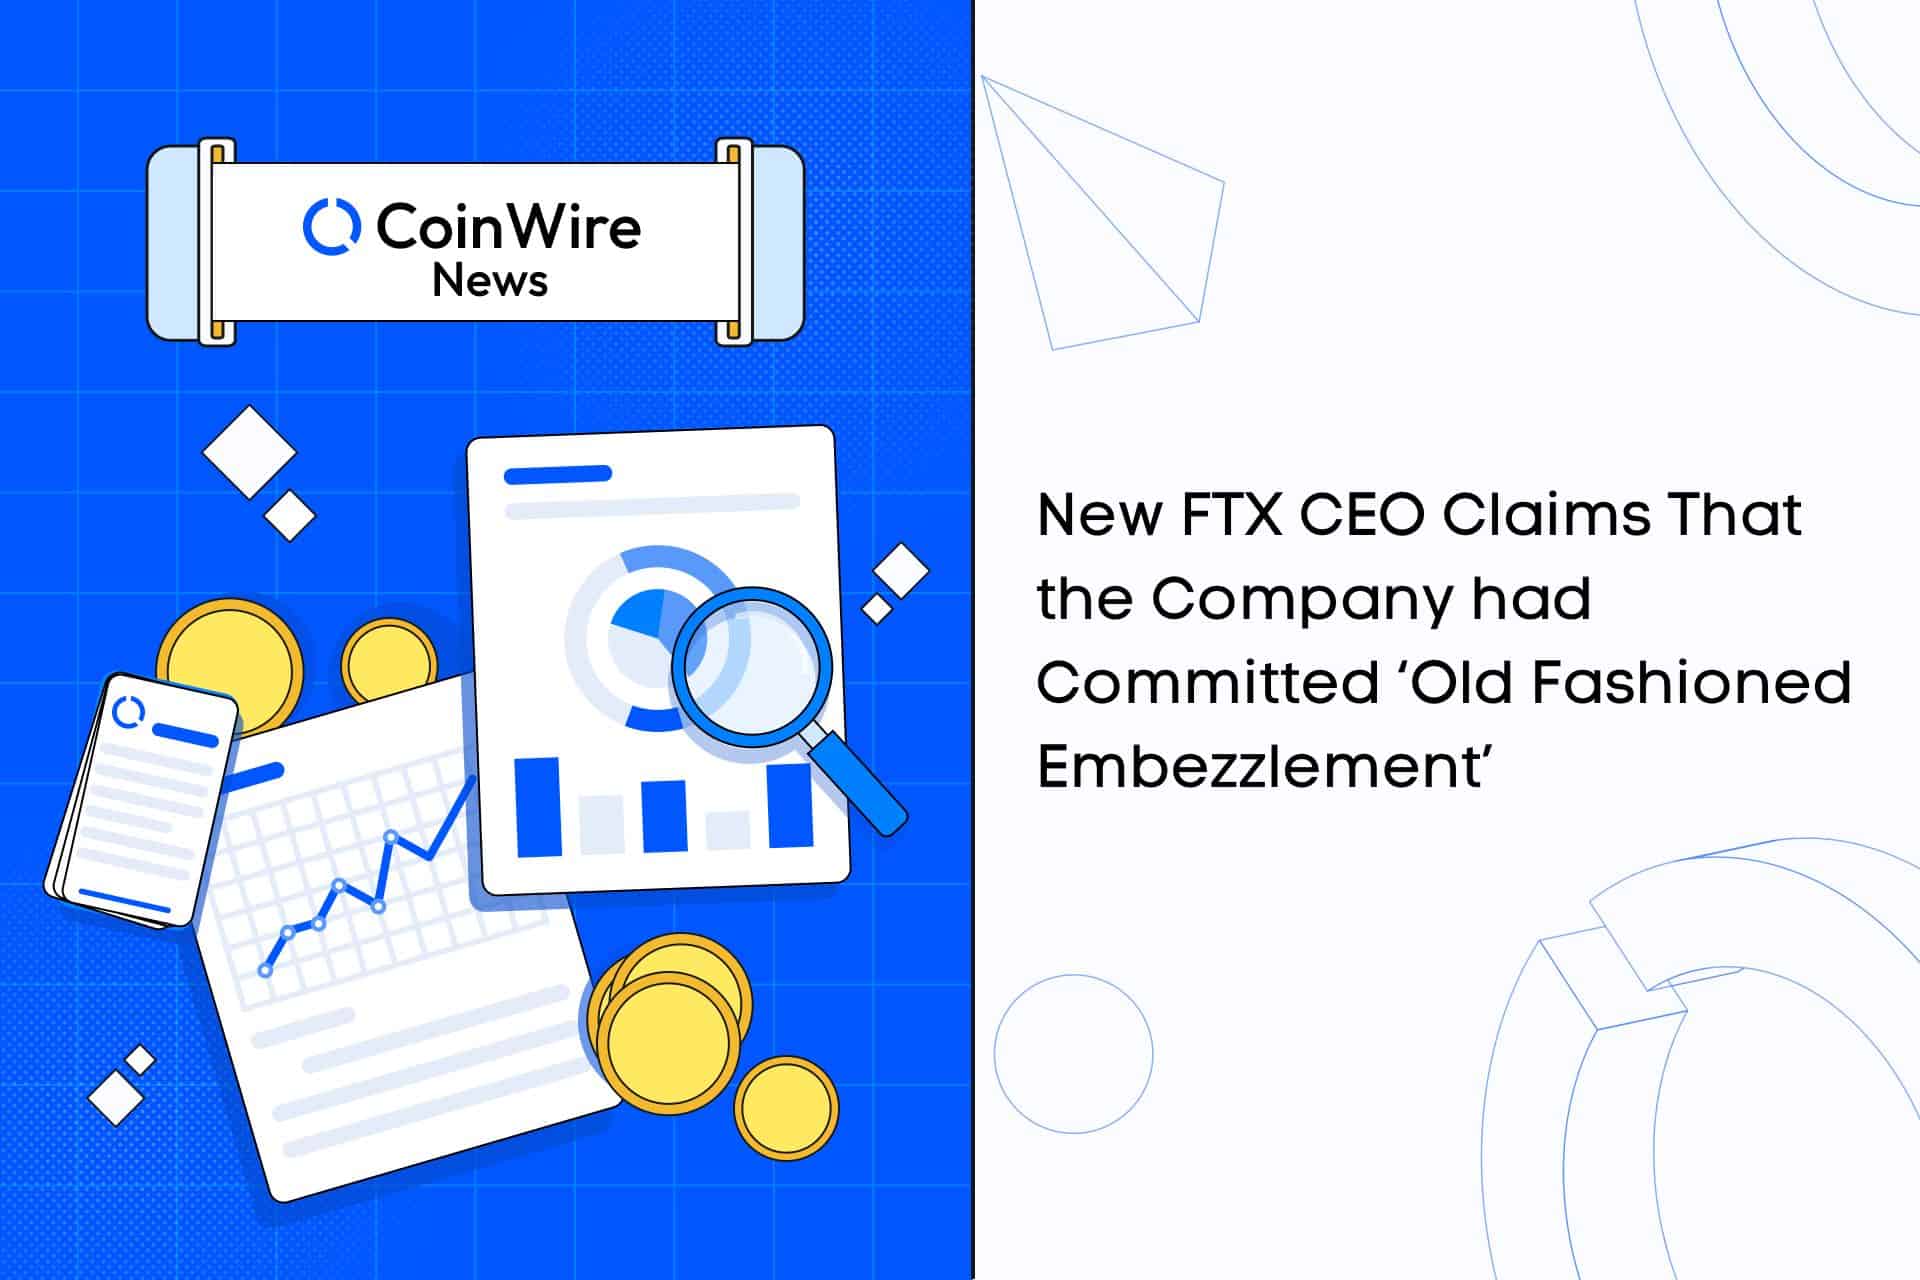 New Ftx Ceo Claims That The Company Had Committed ‘Old Fashioned Embezzlement,’